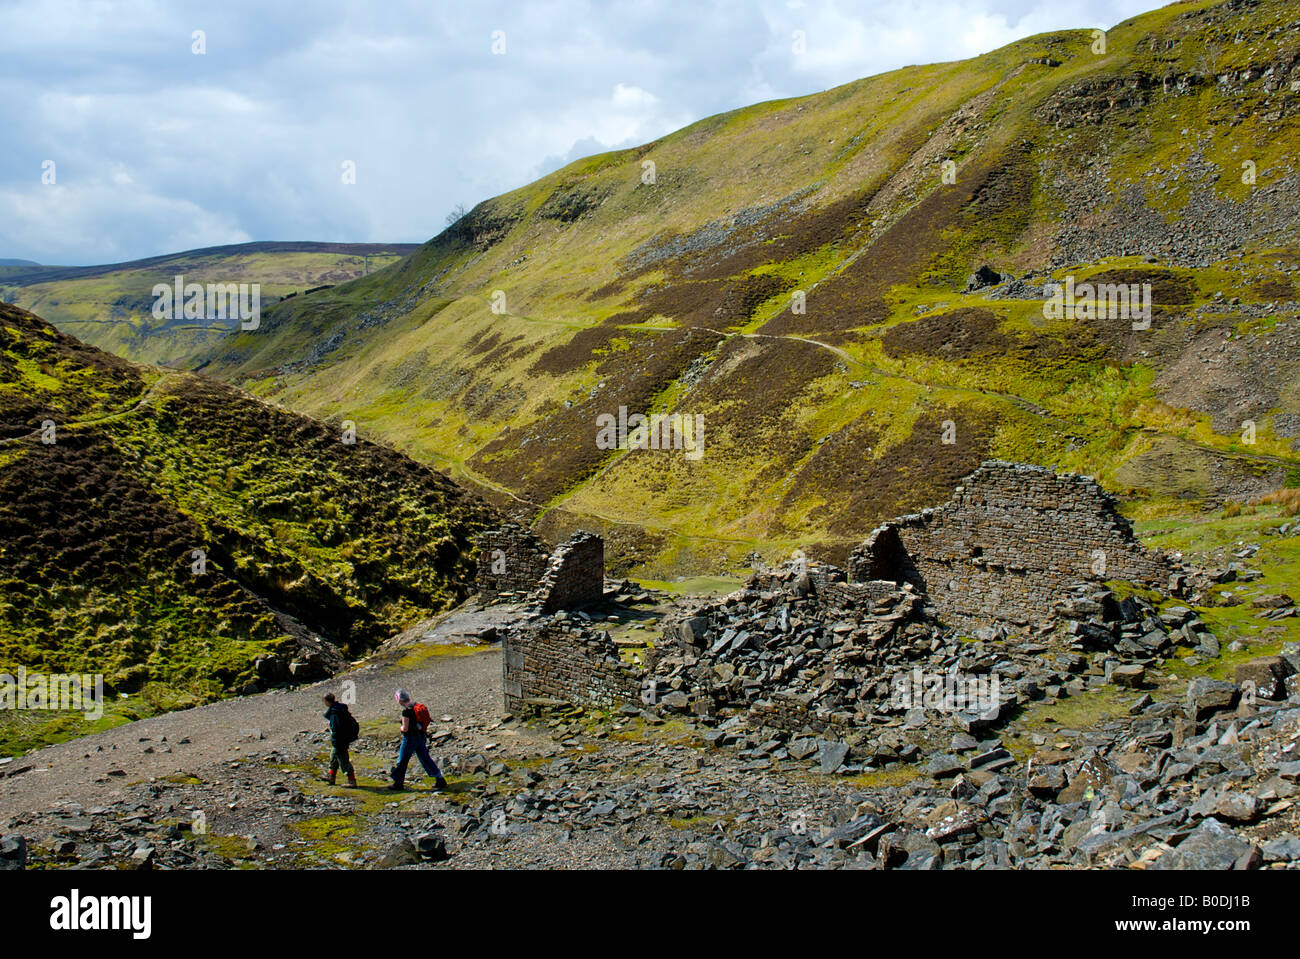 Two walkers at remains of lead mines, Swinner Gill, near Muker, Upper Swaledale, Yorkshire Dales National Park, England UK Stock Photo